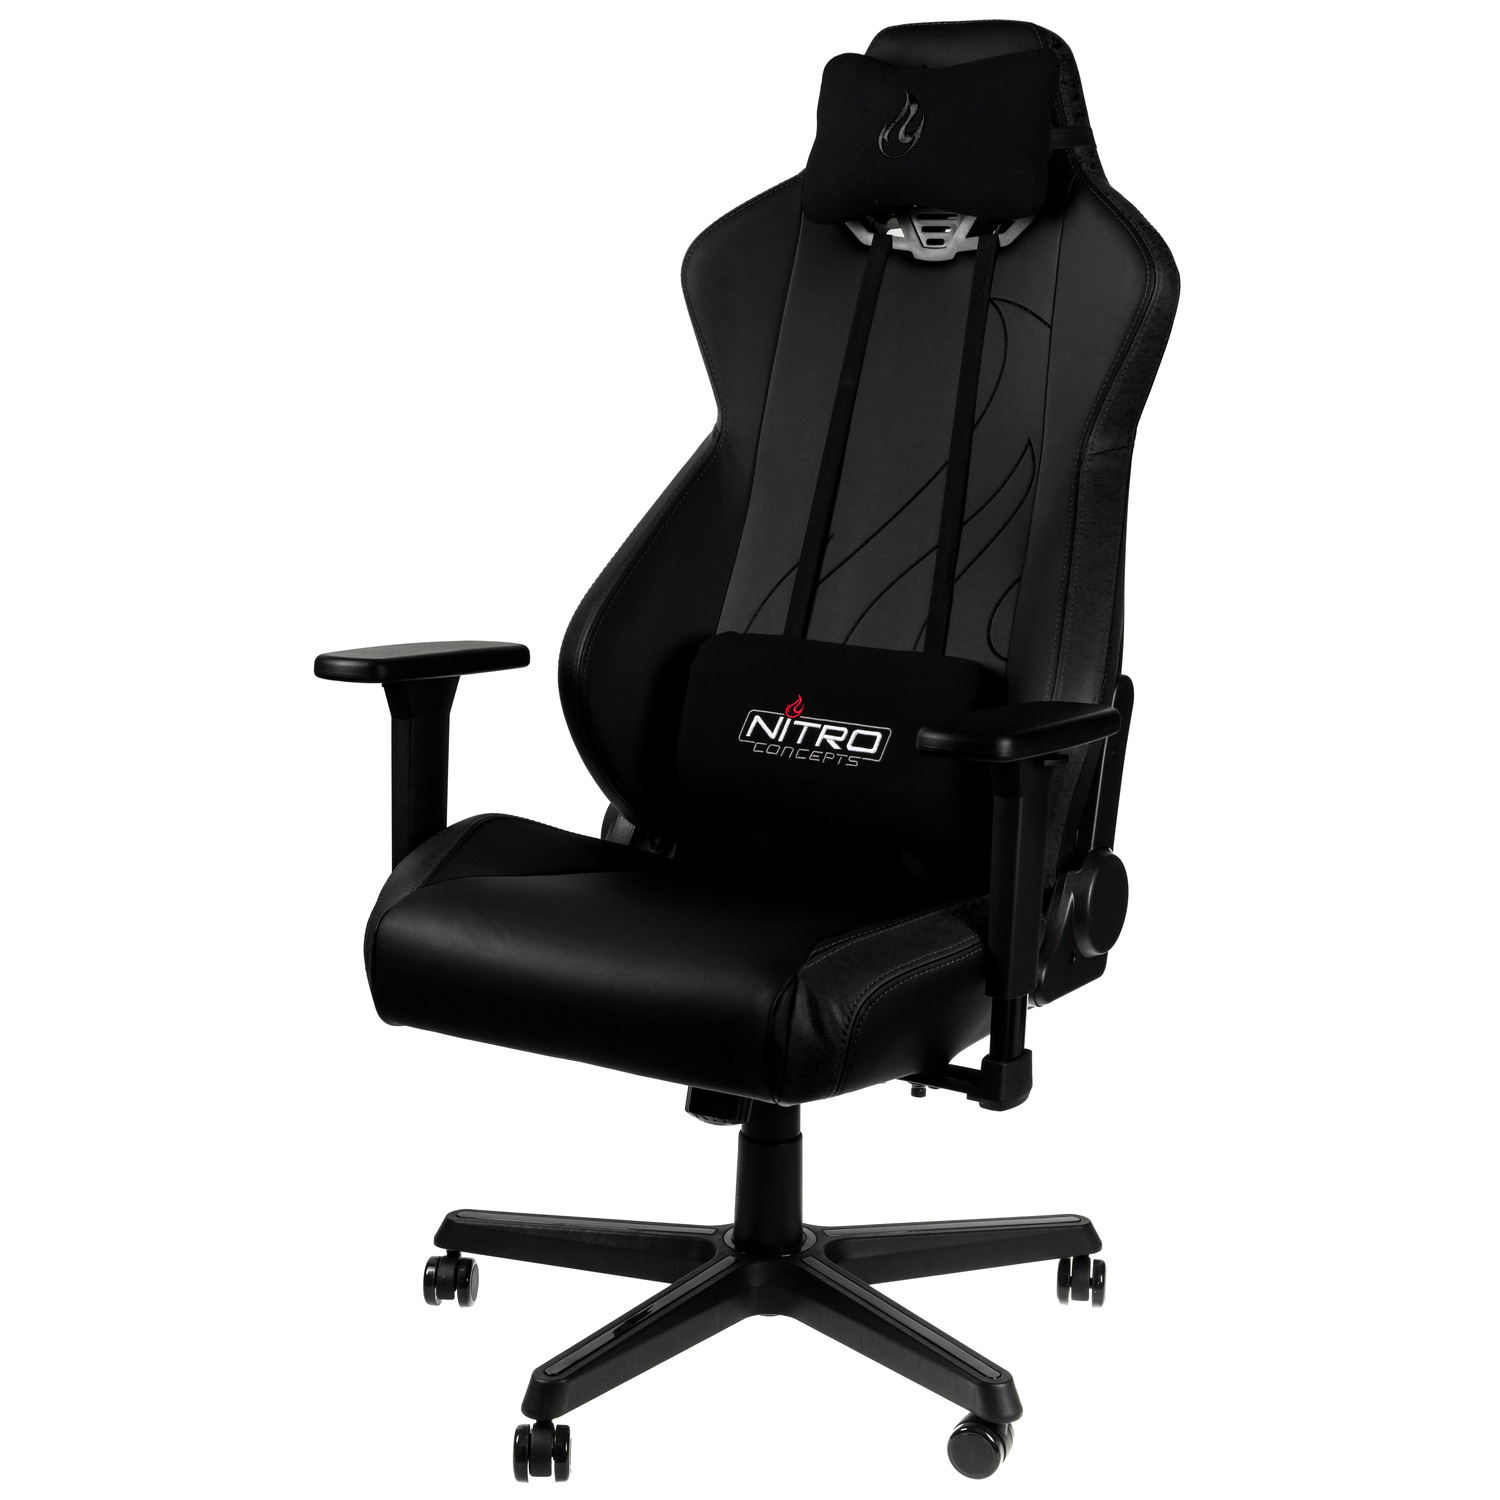 nitro-concepts - S300 EX Gaming Chair Stealth Black